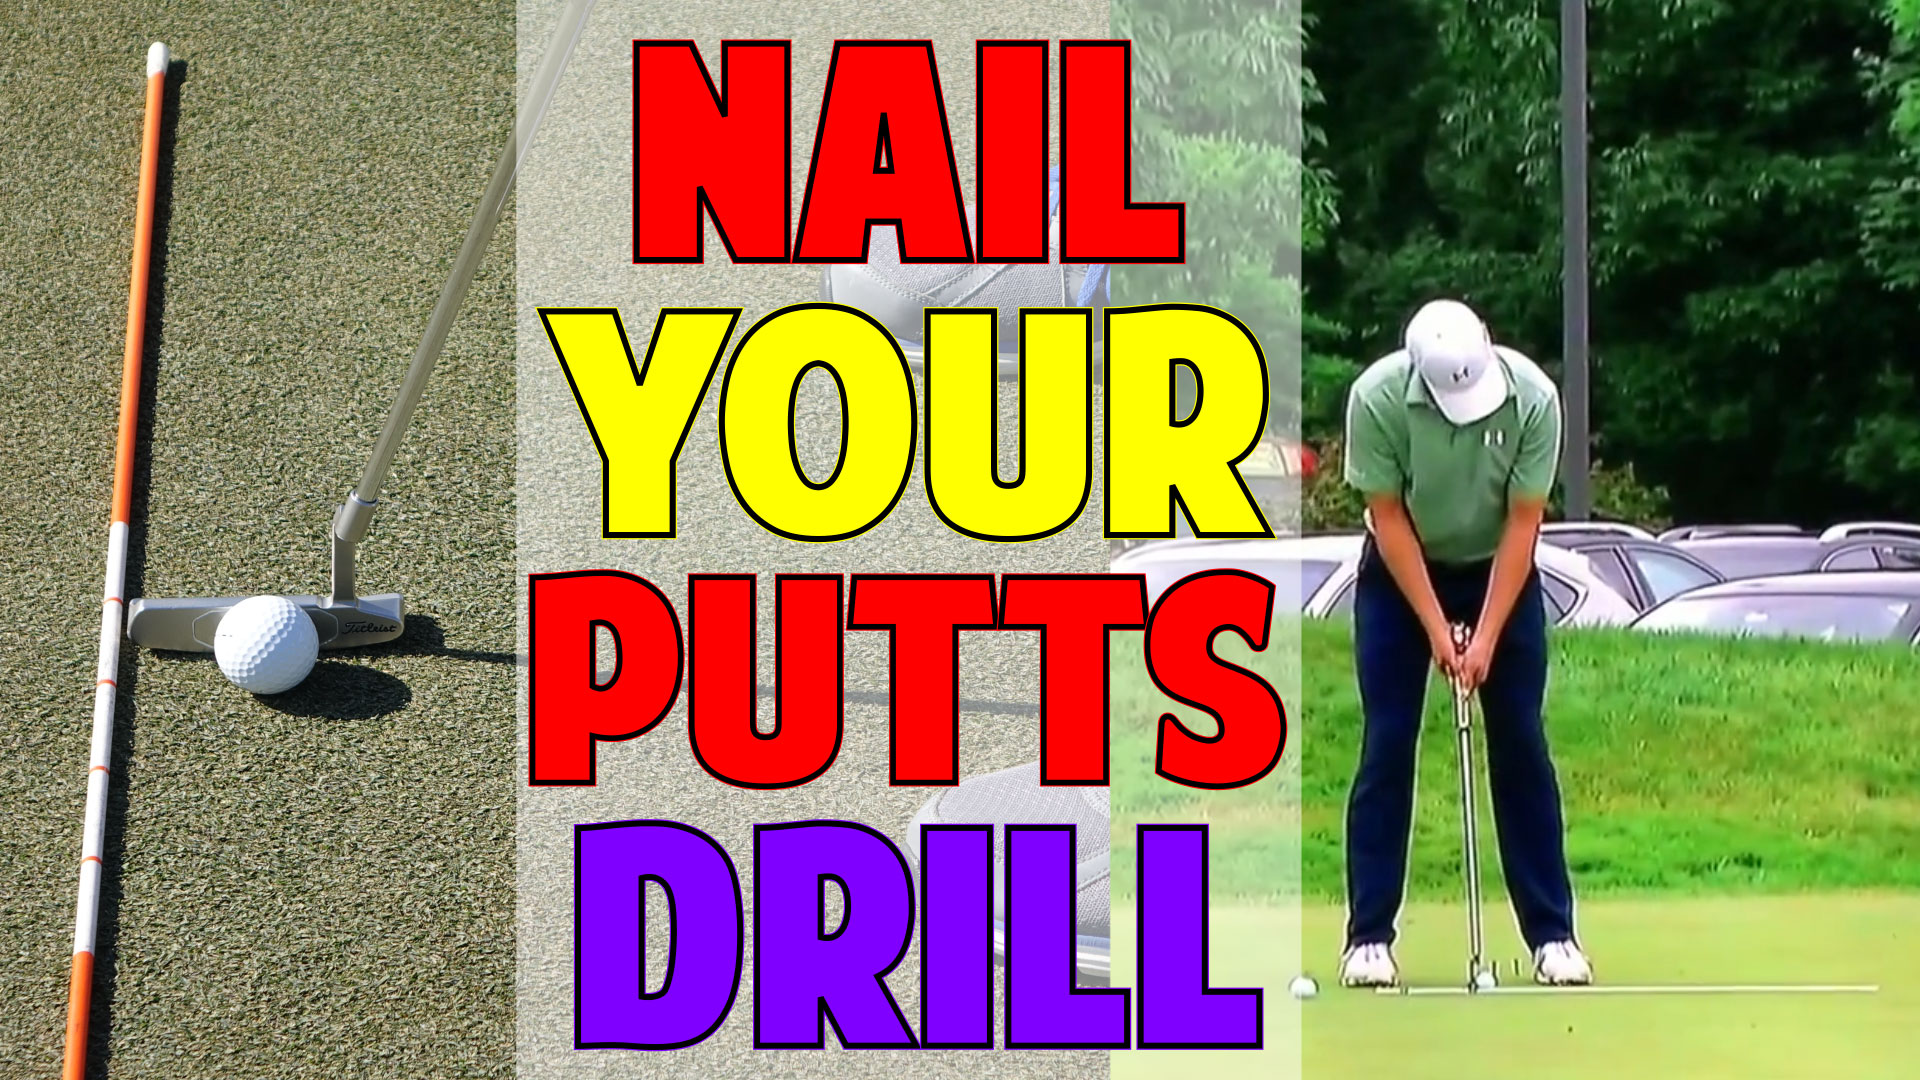 Jordan Putting Lesson | Nail Your Putts with His Favorite Drill